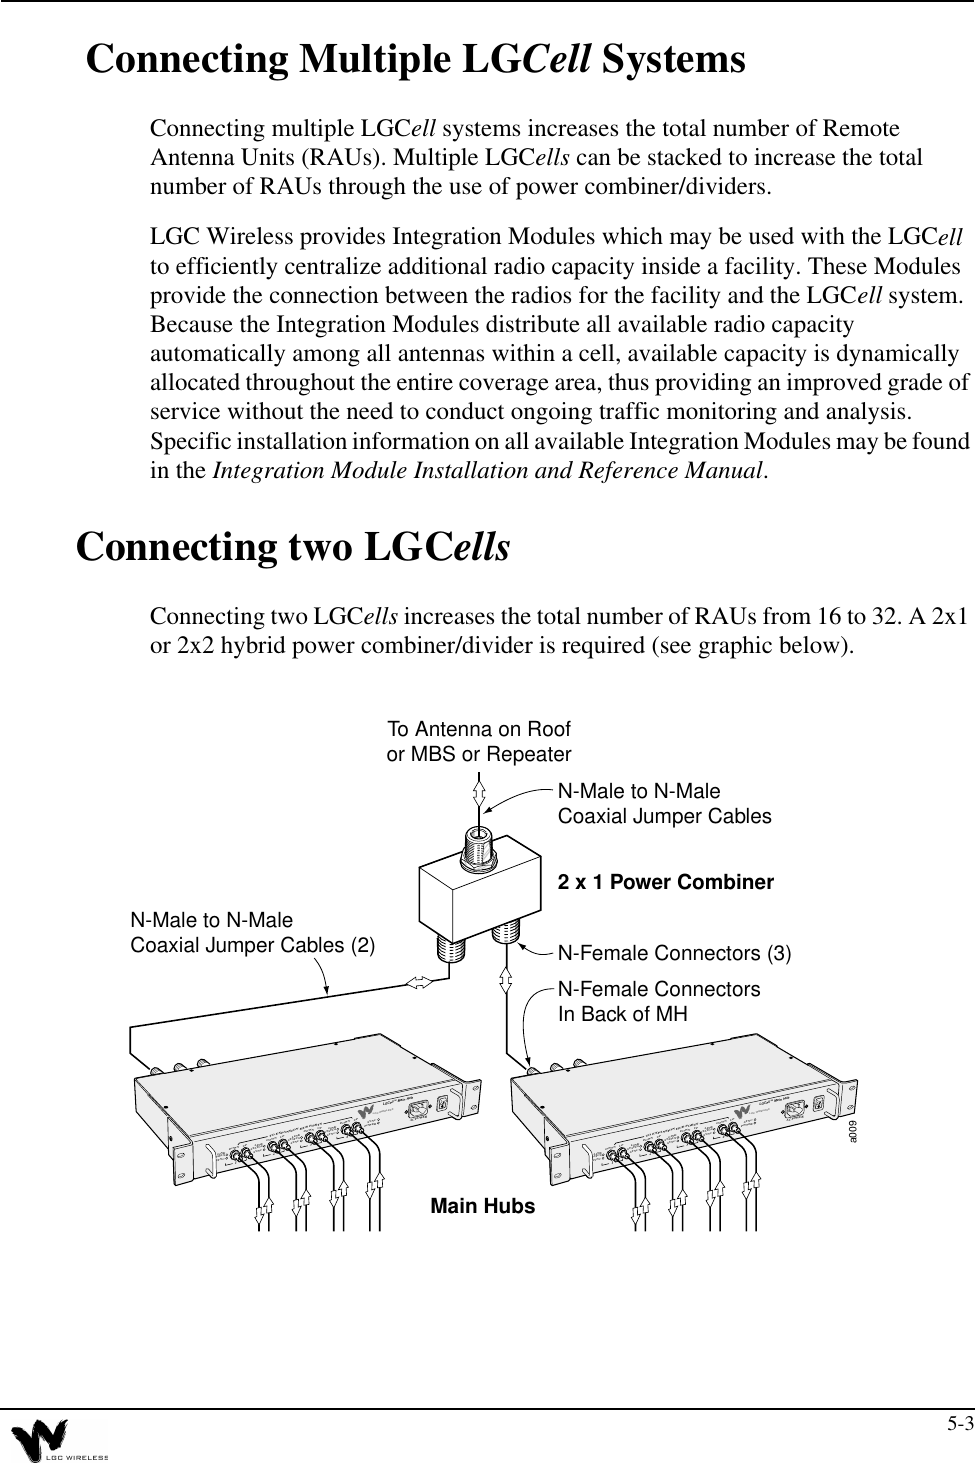 5-3 Connecting Multiple LGCell SystemsConnecting multiple LGCell systems increases the total number of Remote Antenna Units (RAUs). Multiple LGCells can be stacked to increase the total number of RAUs through the use of power combiner/dividers.LGC Wireless provides Integration Modules which may be used with the LGCell to efficiently centralize additional radio capacity inside a facility. These Modules provide the connection between the radios for the facility and the LGCell system. Because the Integration Modules distribute all available radio capacity automatically among all antennas within a cell, available capacity is dynamically allocated throughout the entire coverage area, thus providing an improved grade of service without the need to conduct ongoing traffic monitoring and analysis. Specific installation information on all available Integration Modules may be found in the Integration Module Installation and Reference Manual.Connecting two LGCellsConnecting two LGCells increases the total number of RAUs from 16 to 32. A 2x1 or 2x2 hybrid power combiner/divider is required (see graphic below).a0091234DOWNLINKSTATUSSYNCUPSYNCPOWERAC POWERTO EXPANSION HUB PORTSLGC WIRELESSLGCell™ Main HubDOWNLINKSTATUSSYNCUPDOWNLINKSTATUSSYNCUPDOWNLINKSTATUSSYNCUP1234DOWNLINKSTATUSSYNCUPSYNCPOWERAC POWERTO EXPANSION HUB PORTSLGC WIRELESSLGCell™ Main HubDOWNLINKSTATUSSYNCUPDOWNLINKSTATUSSYNCUPDOWNLINKSTATUSSYNCUPMain Hubs2 x 1 Power CombinerN-Female ConnectorsIn Back of MHN-Male to N-MaleCoaxial Jumper Cables (2)N-Male to N-MaleCoaxial Jumper CablesN-Female Connectors (3)To Antenna on Roofor MBS or Repeater